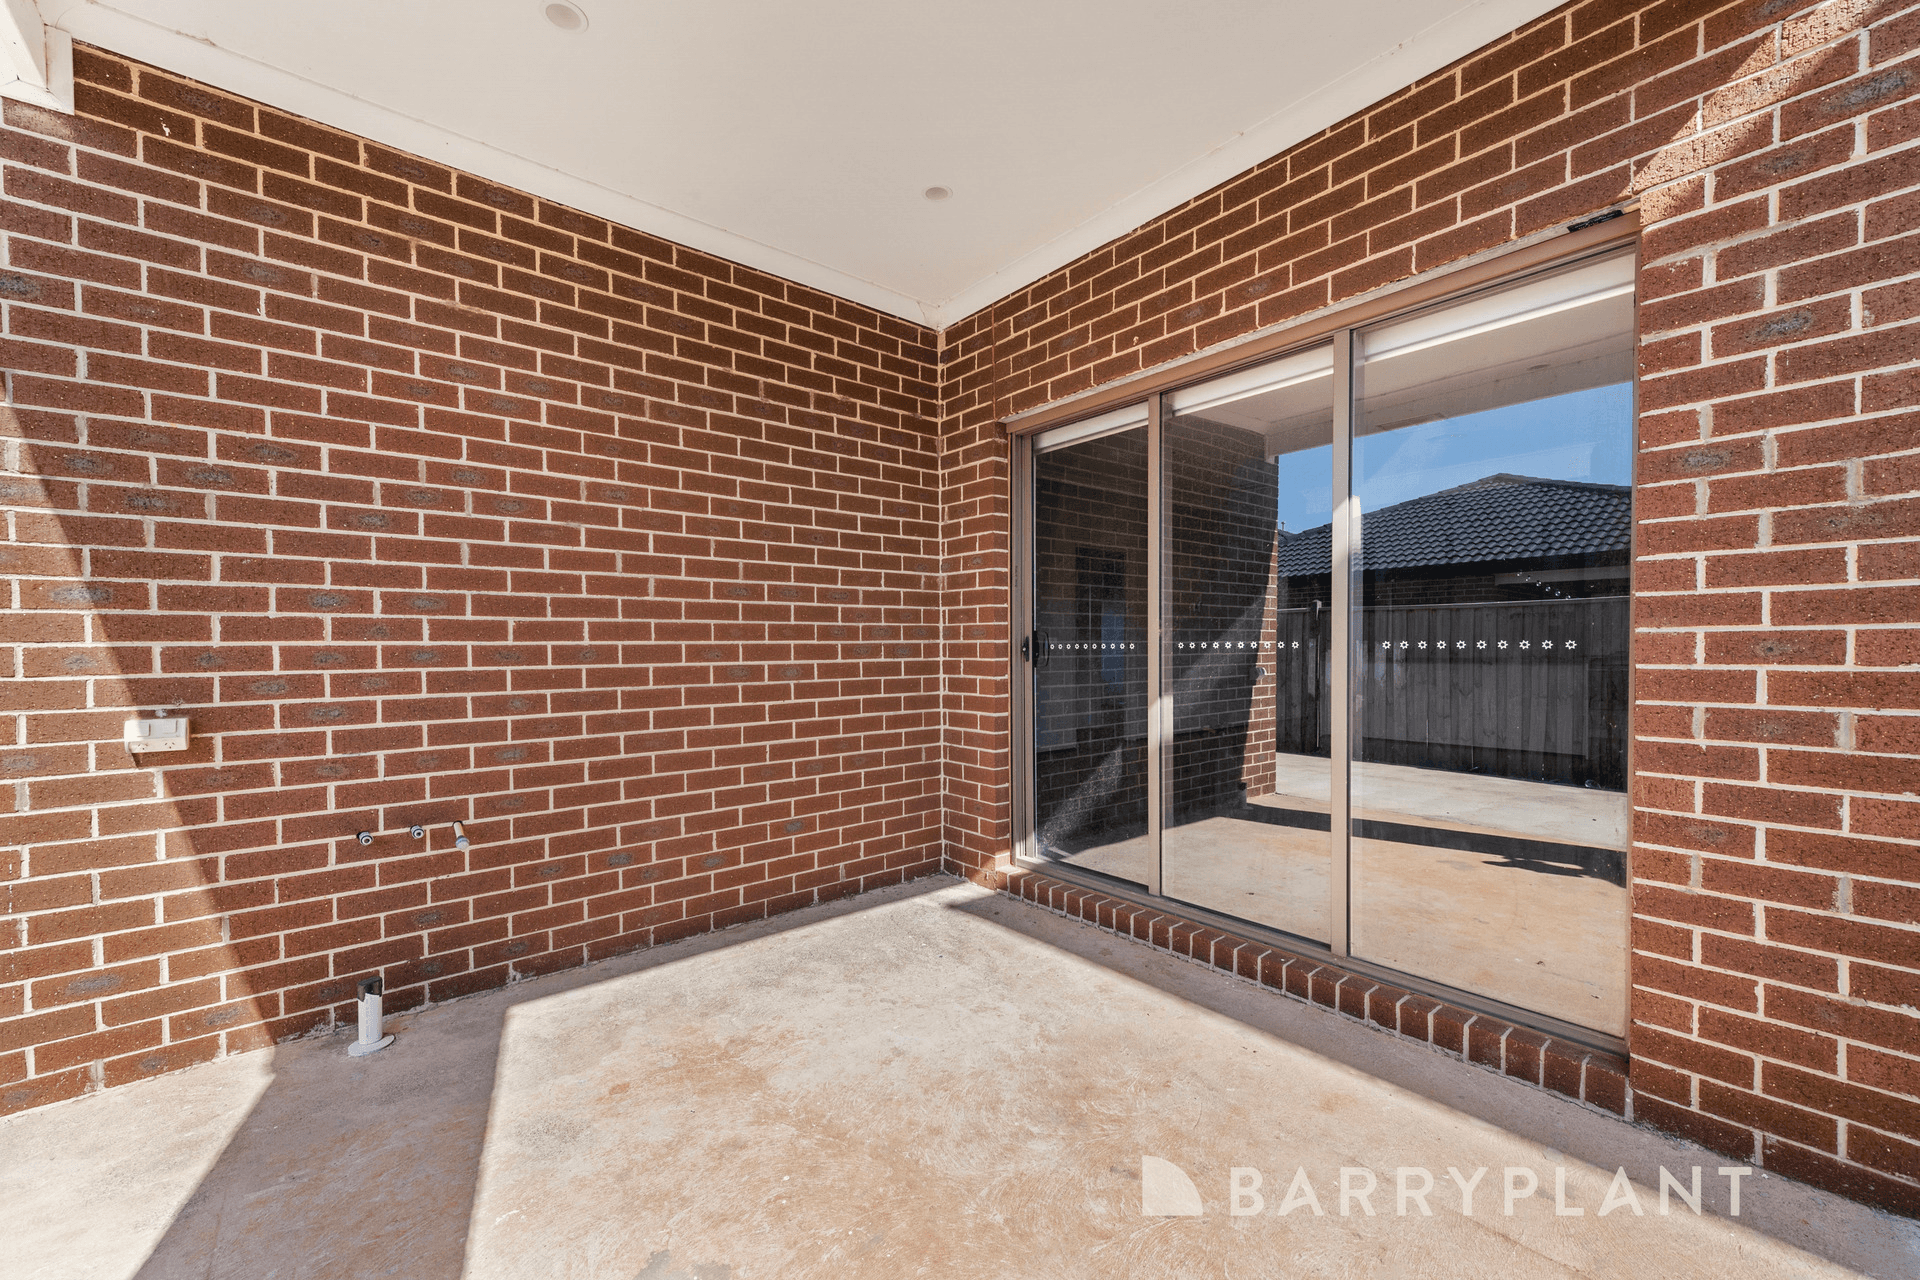 28 Murray Road, Thornhill Park, VIC 3335